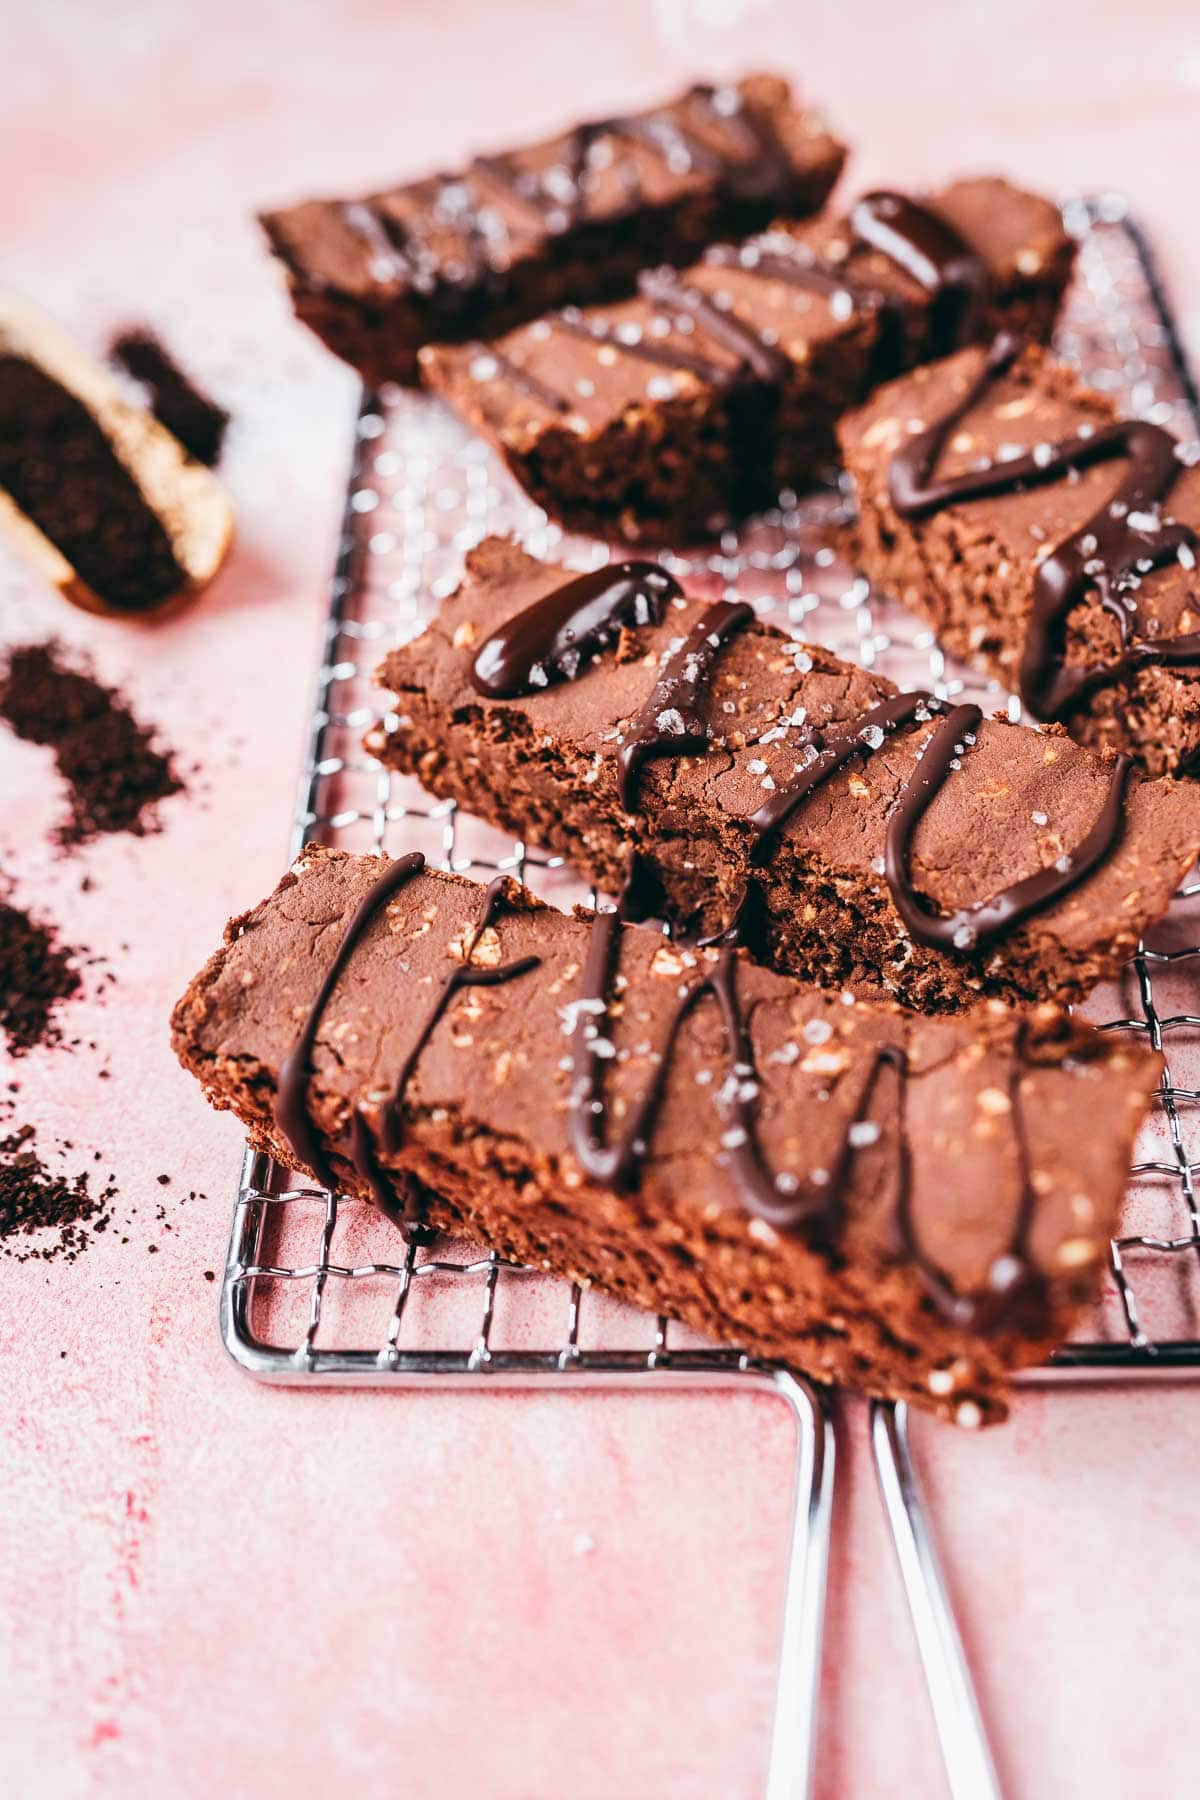 Chocolate protein bars resting on a silver cooling rack on a pink table.